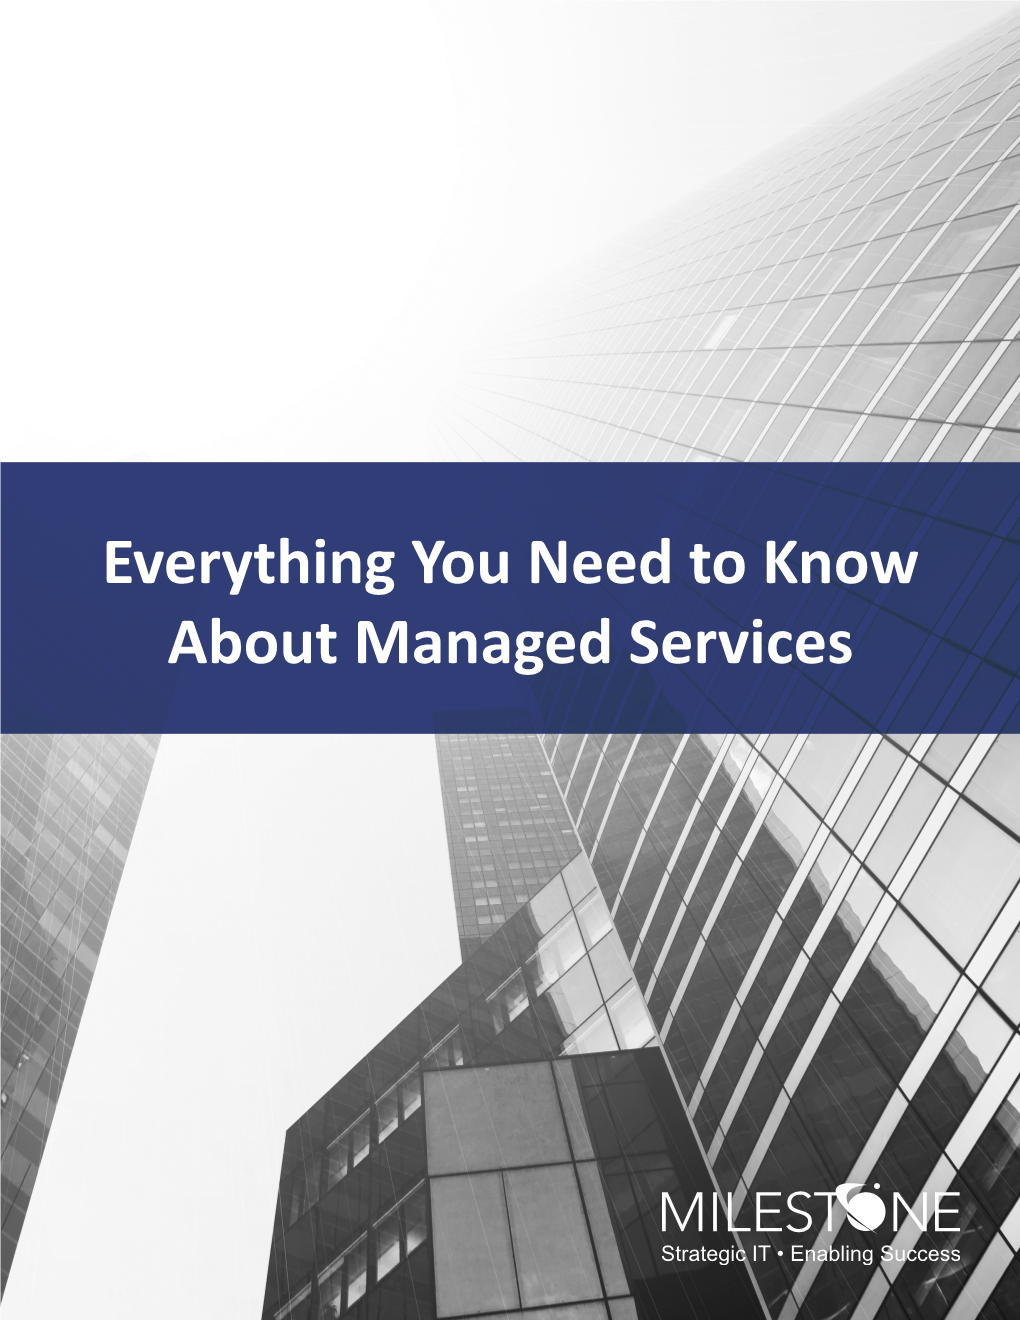 Everything You Need to Know About Managed Services Table of Contents